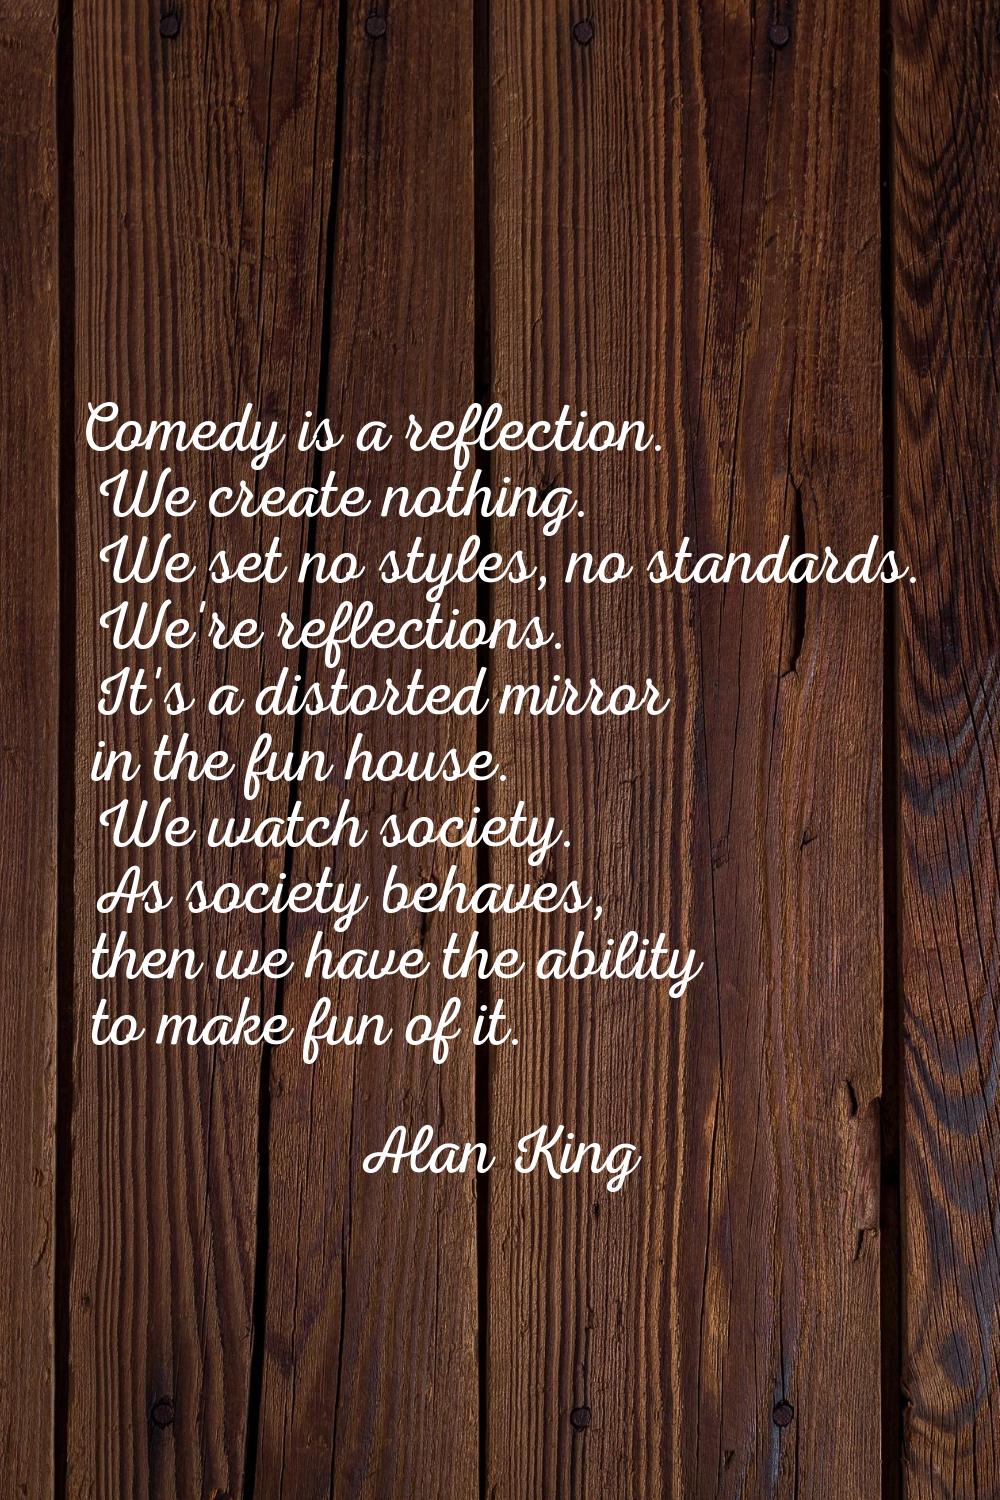 Comedy is a reflection. We create nothing. We set no styles, no standards. We're reflections. It's 